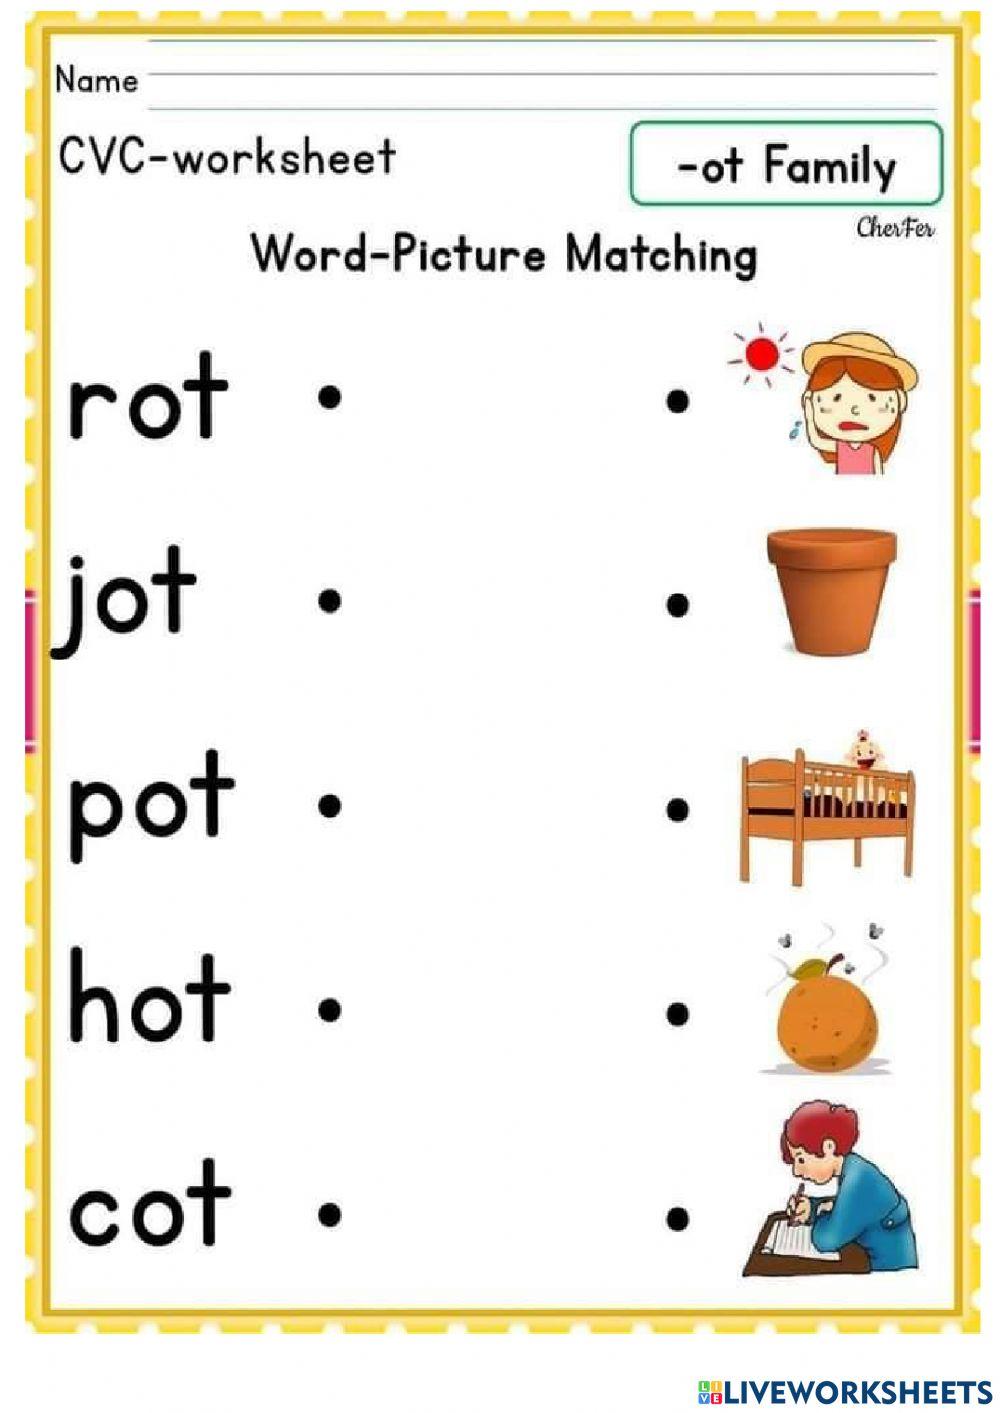 Ot Family word picture matching